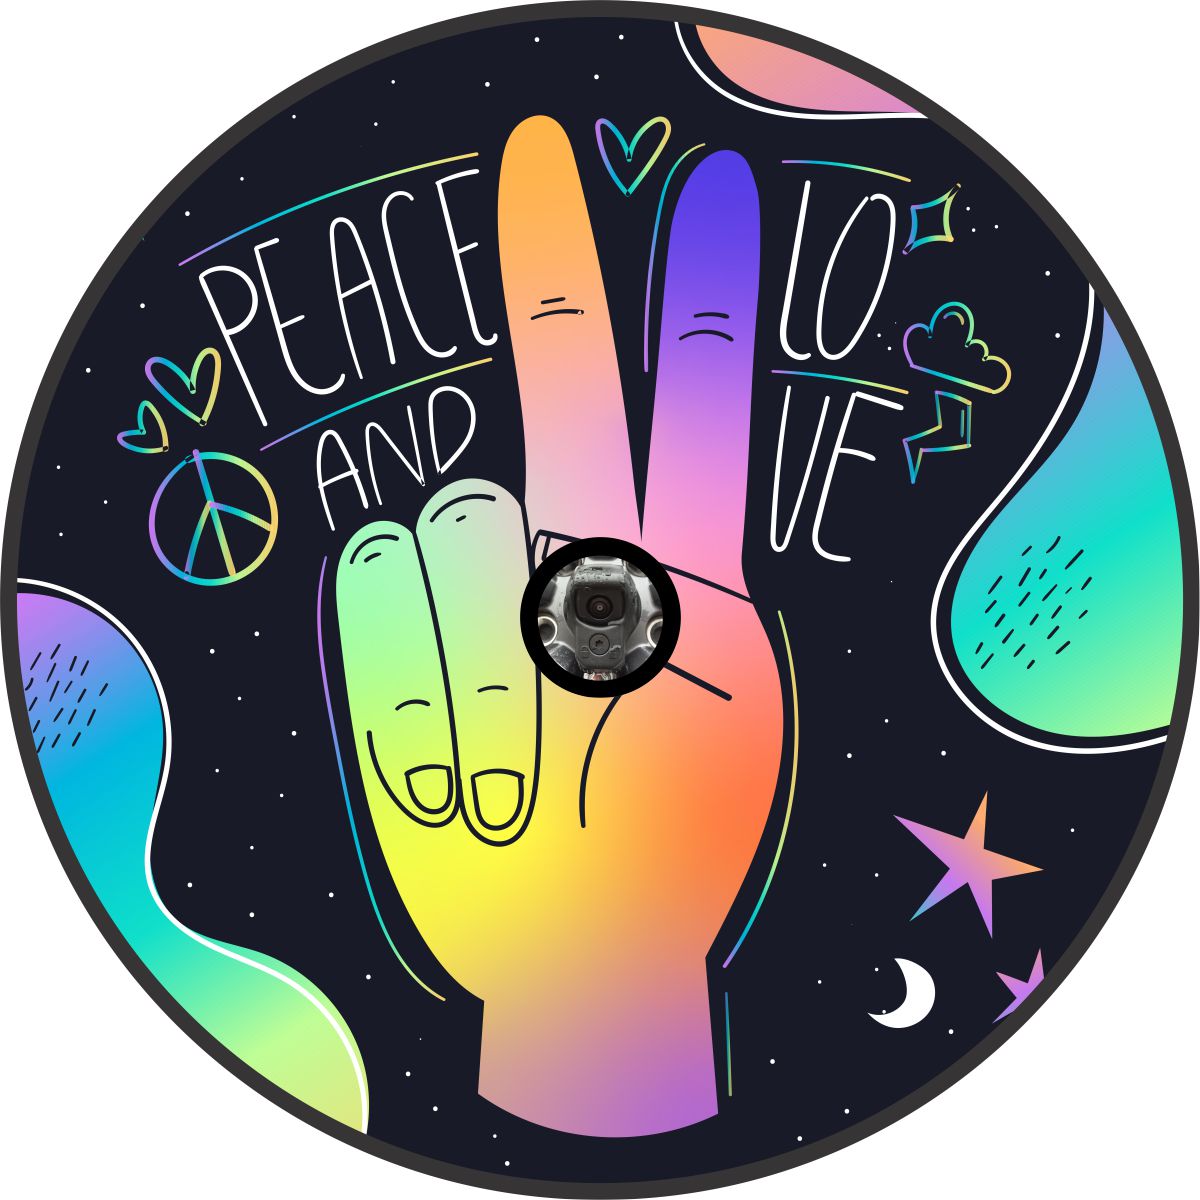 Ombre bright colors of a hand throwing a peace sign and the saying peace and love written out as a spare tire cover design with a back up camera hole.